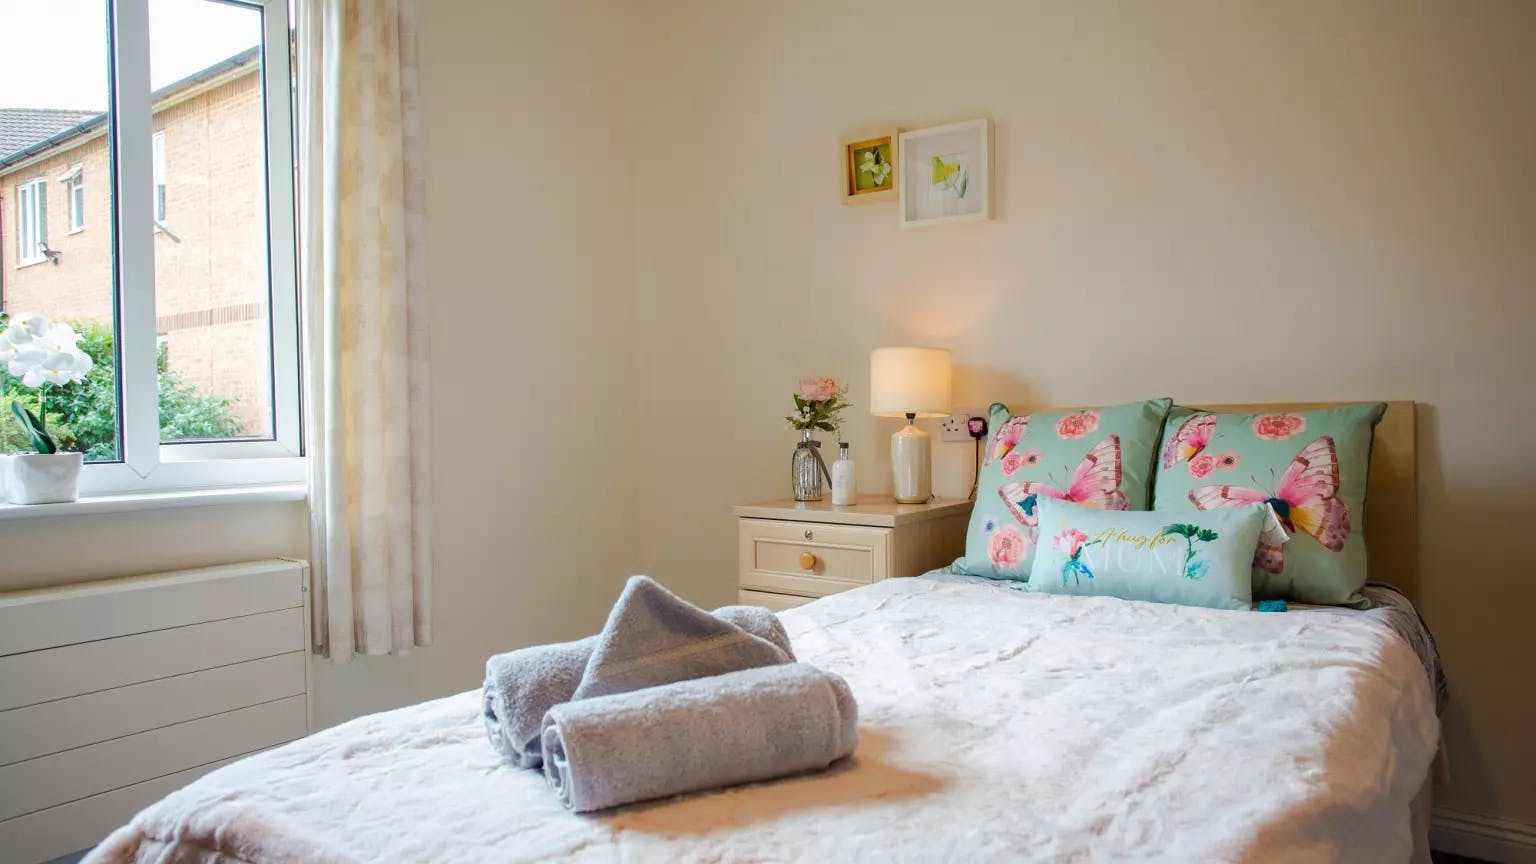 Bedroom of Courtland Lodge care home in Watford, Hertfordshire